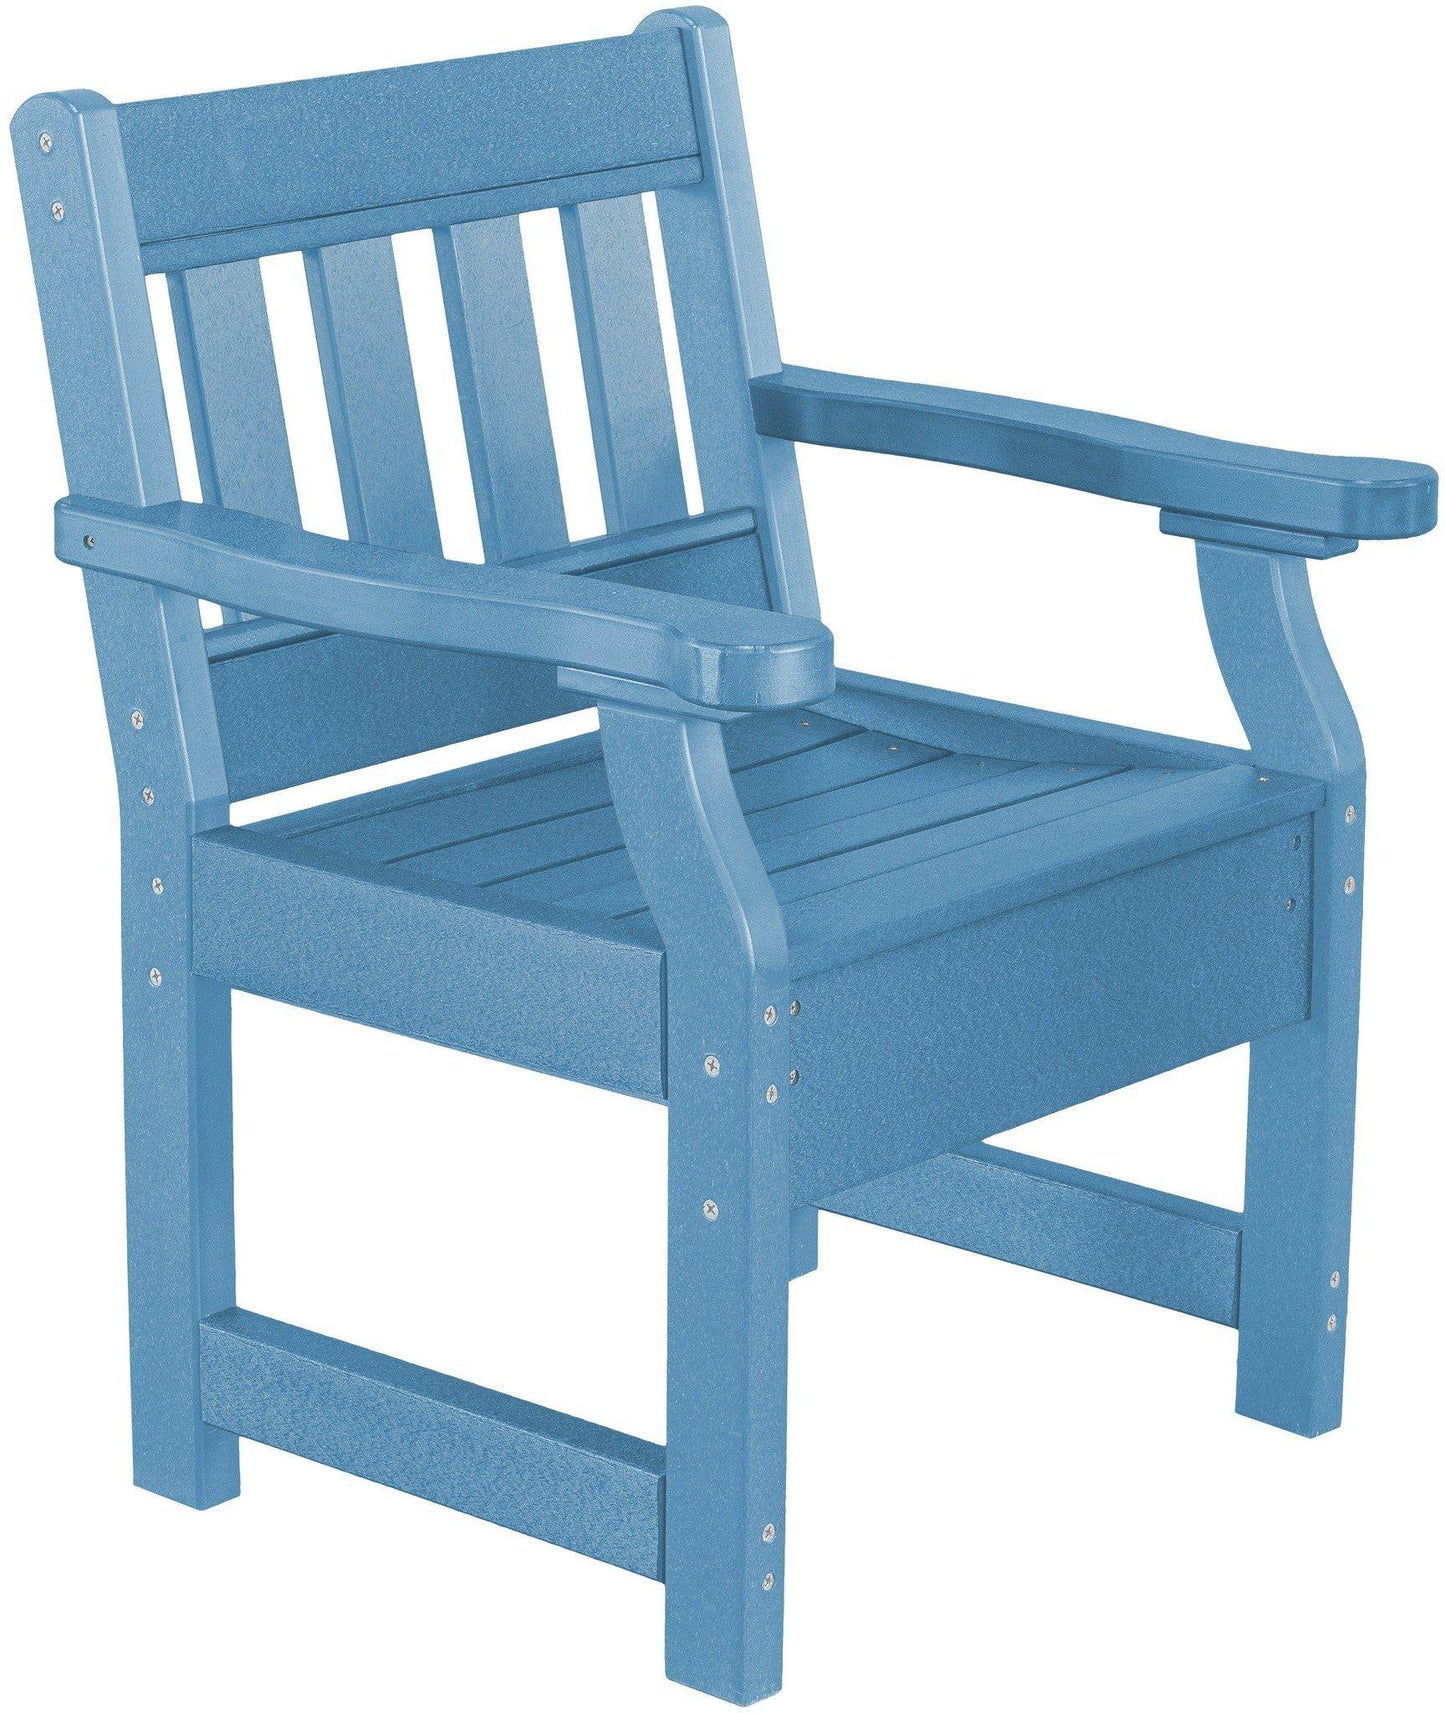 Wildridge Heritage Recycled Plastic Outdoor Garden Chair - LEAD TIME TO SHIP 6 WEEKS OR LESS